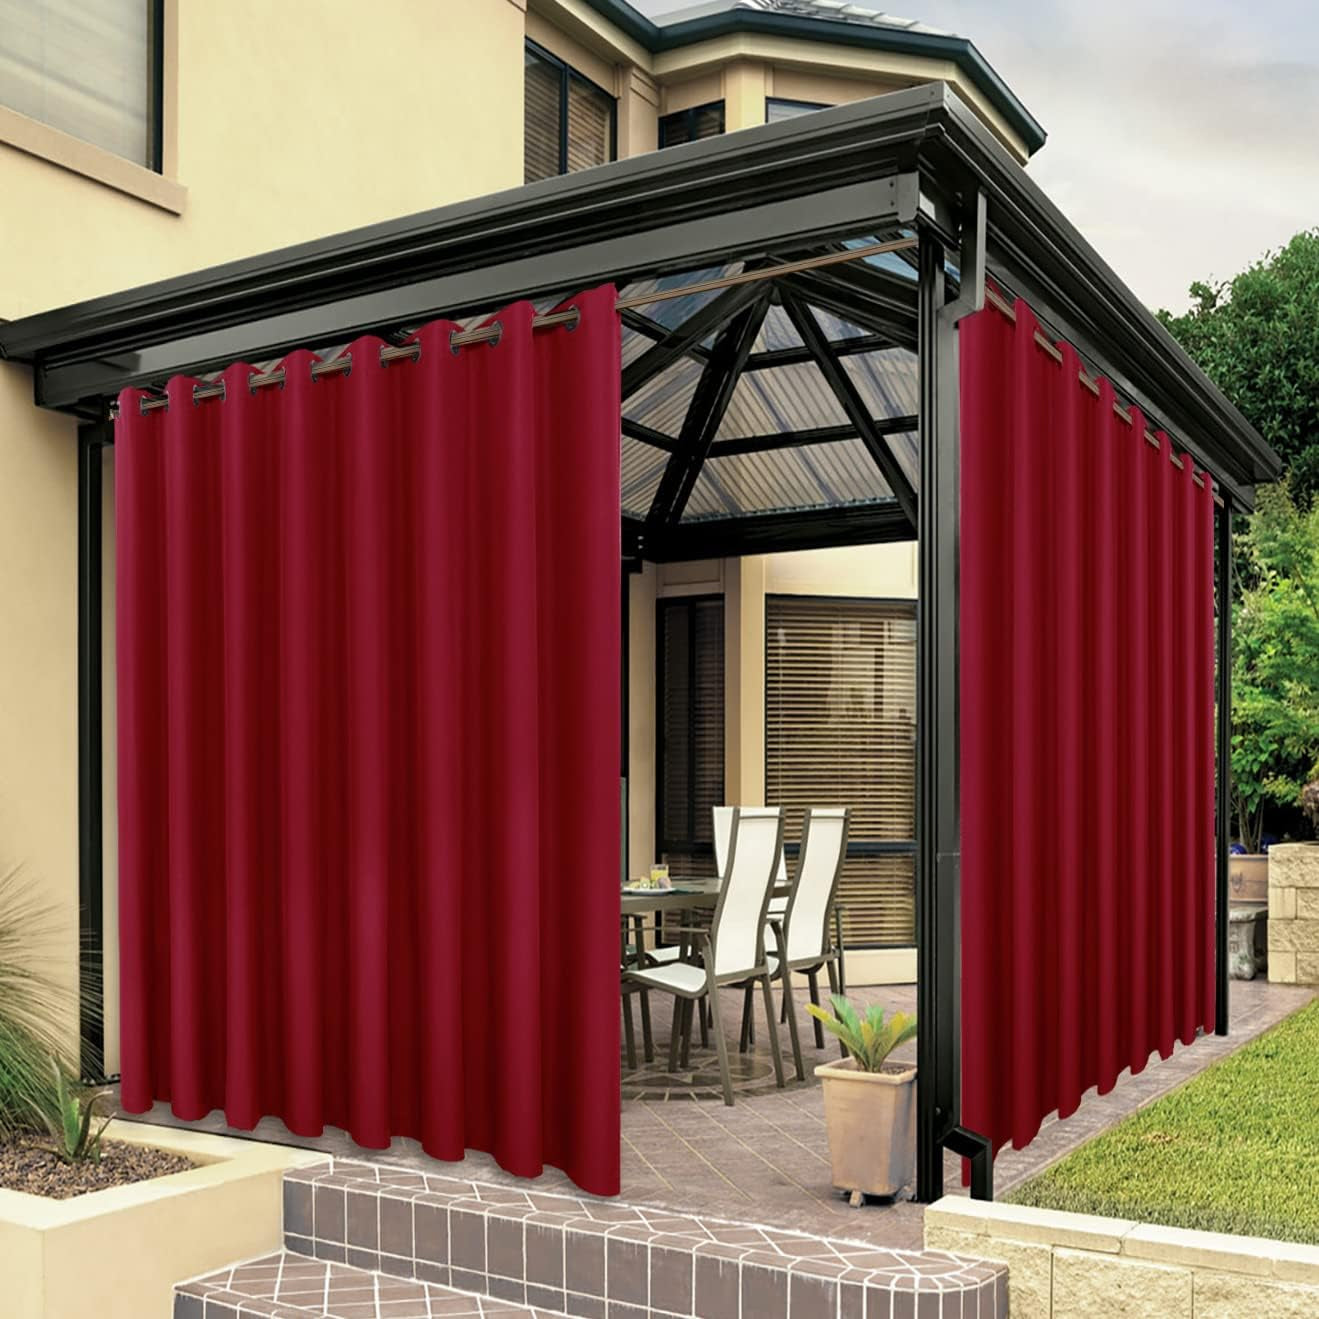 BONZER Outdoor Curtains for Patio Waterproof, Premium Thick Privacy Weatherproof Grommet outside Curtains for Porch, Gazebo, Deck, 1 Panel, 54W X 84L Inch, White  BONZER Red 110W X 108L Inch 